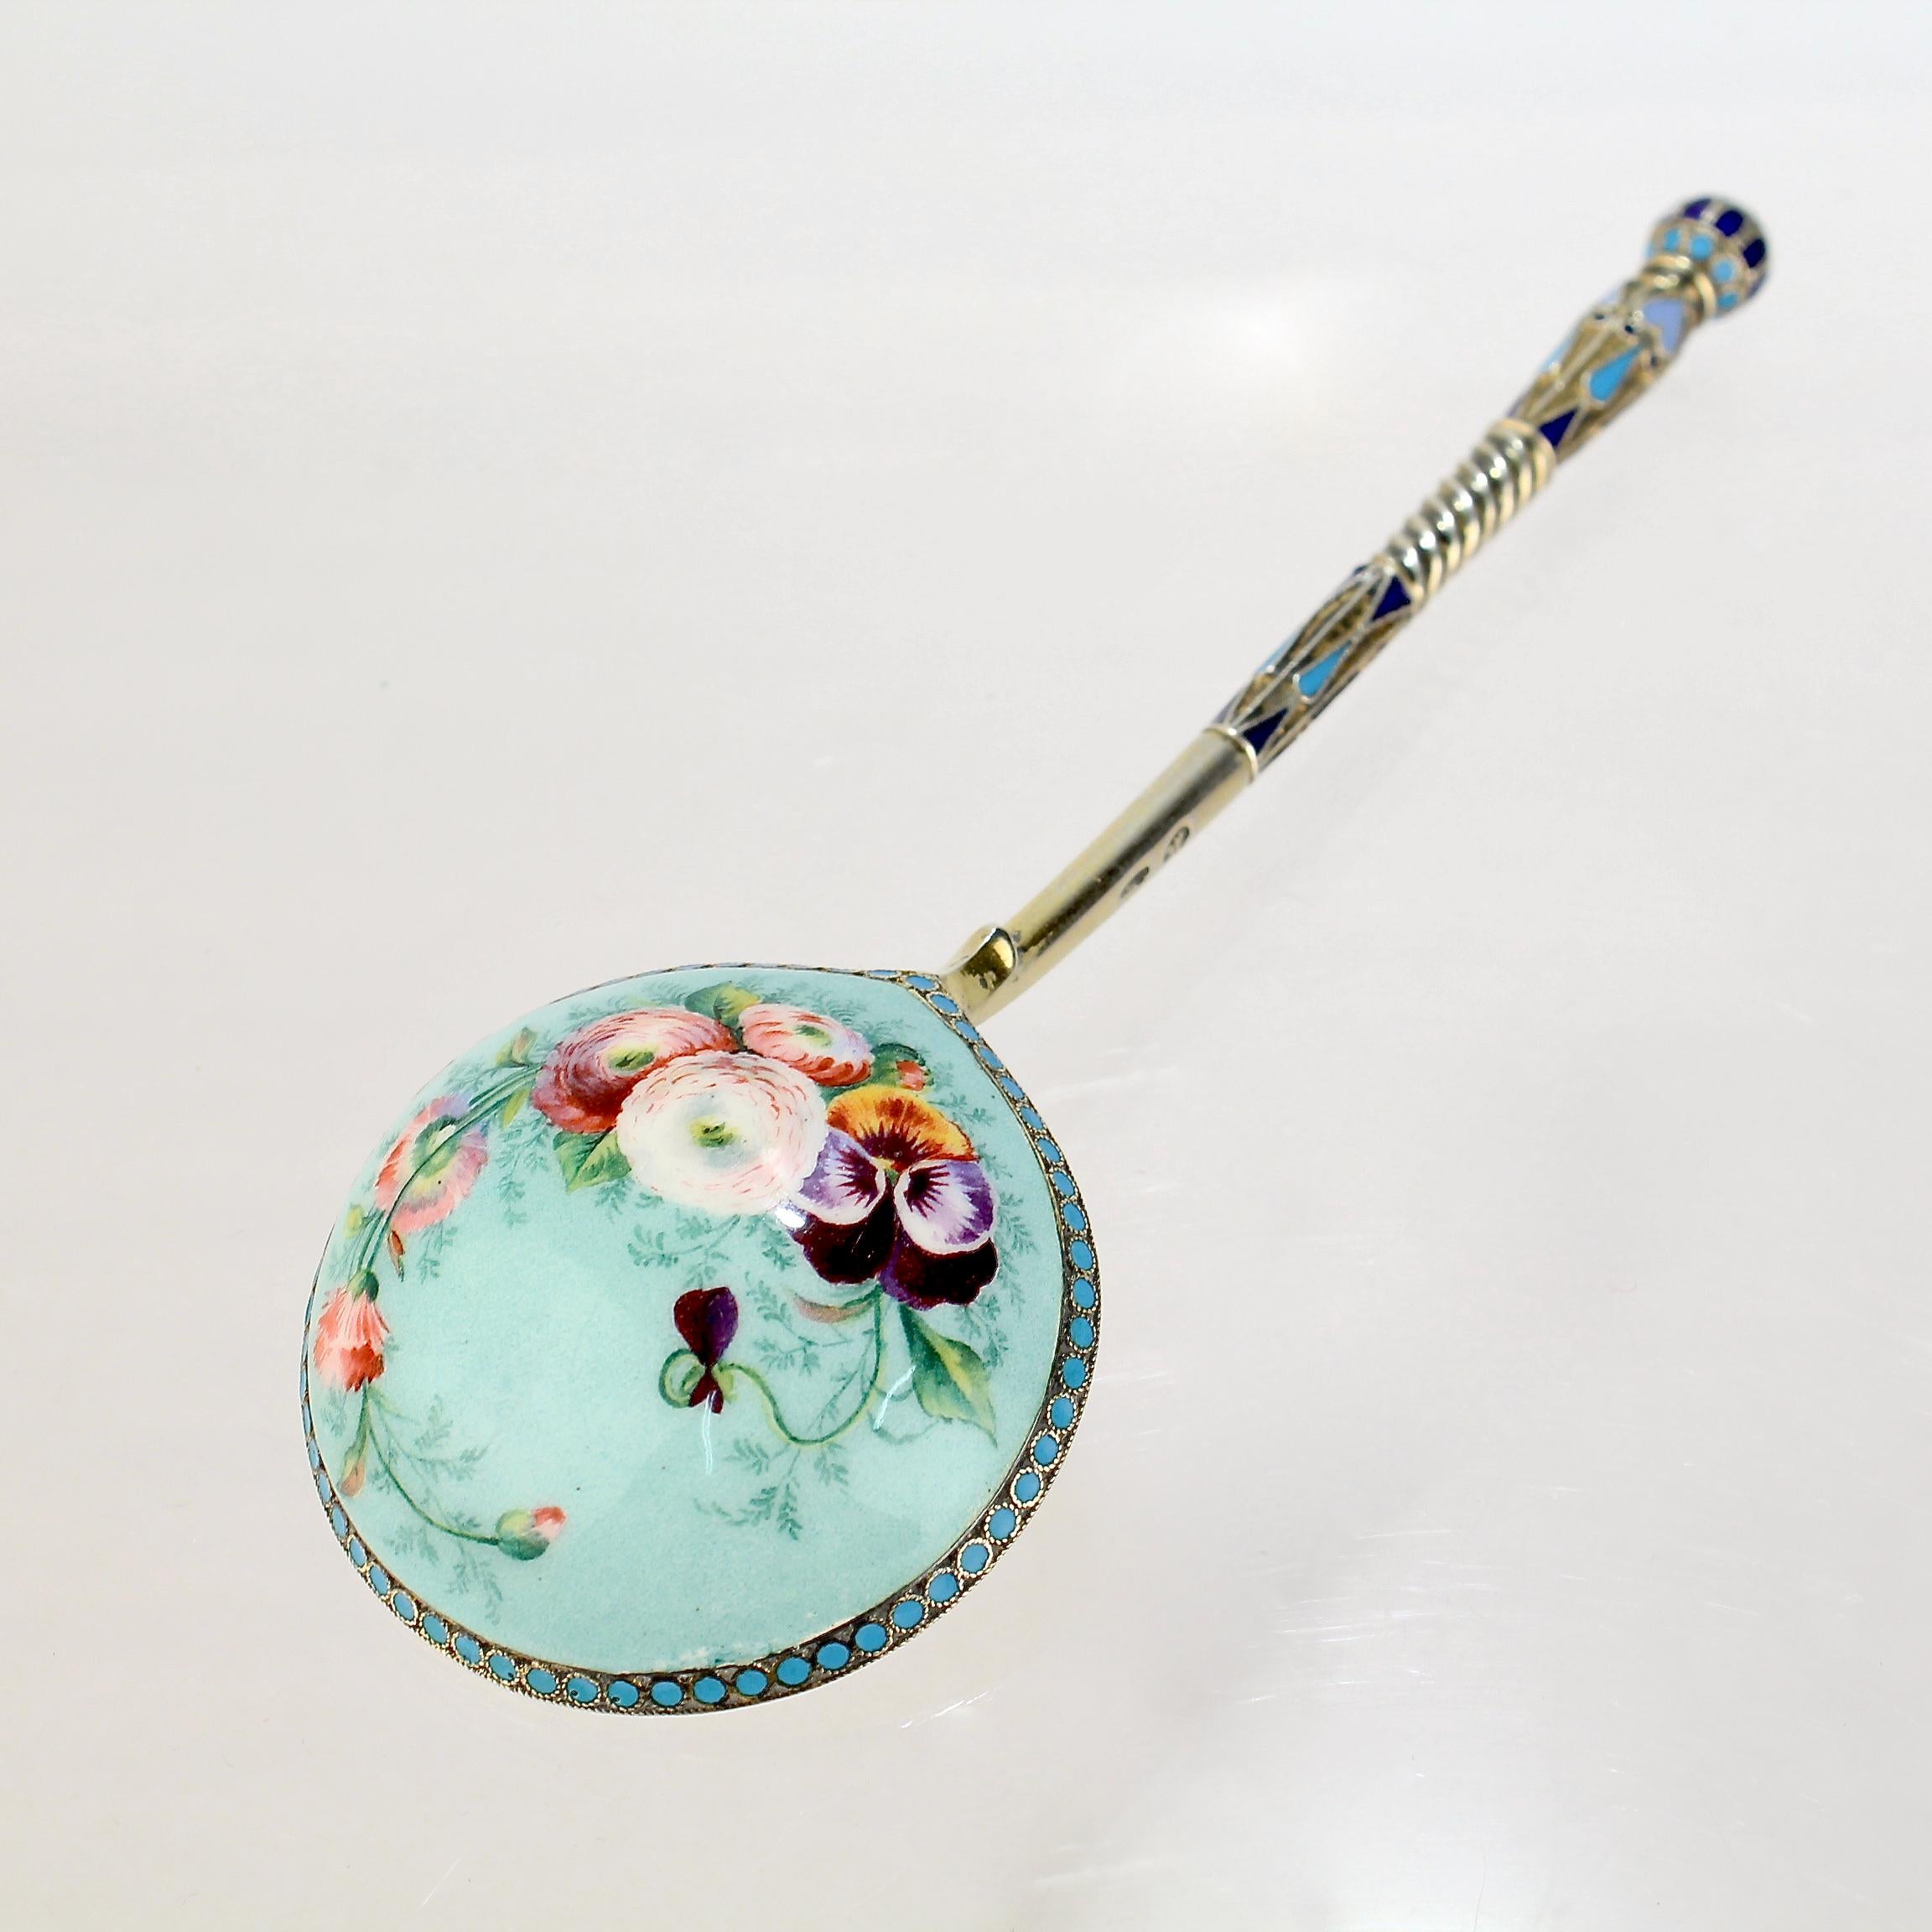 A very fine Russian silver & enamel spoon.

By Ivan Saltykov.

With a polychrome cloisonné enamel decorated handle and a hand painted pictorial flower scene on the reverse of the bowl. 

The bowl and handle of the spoon retain much of the original